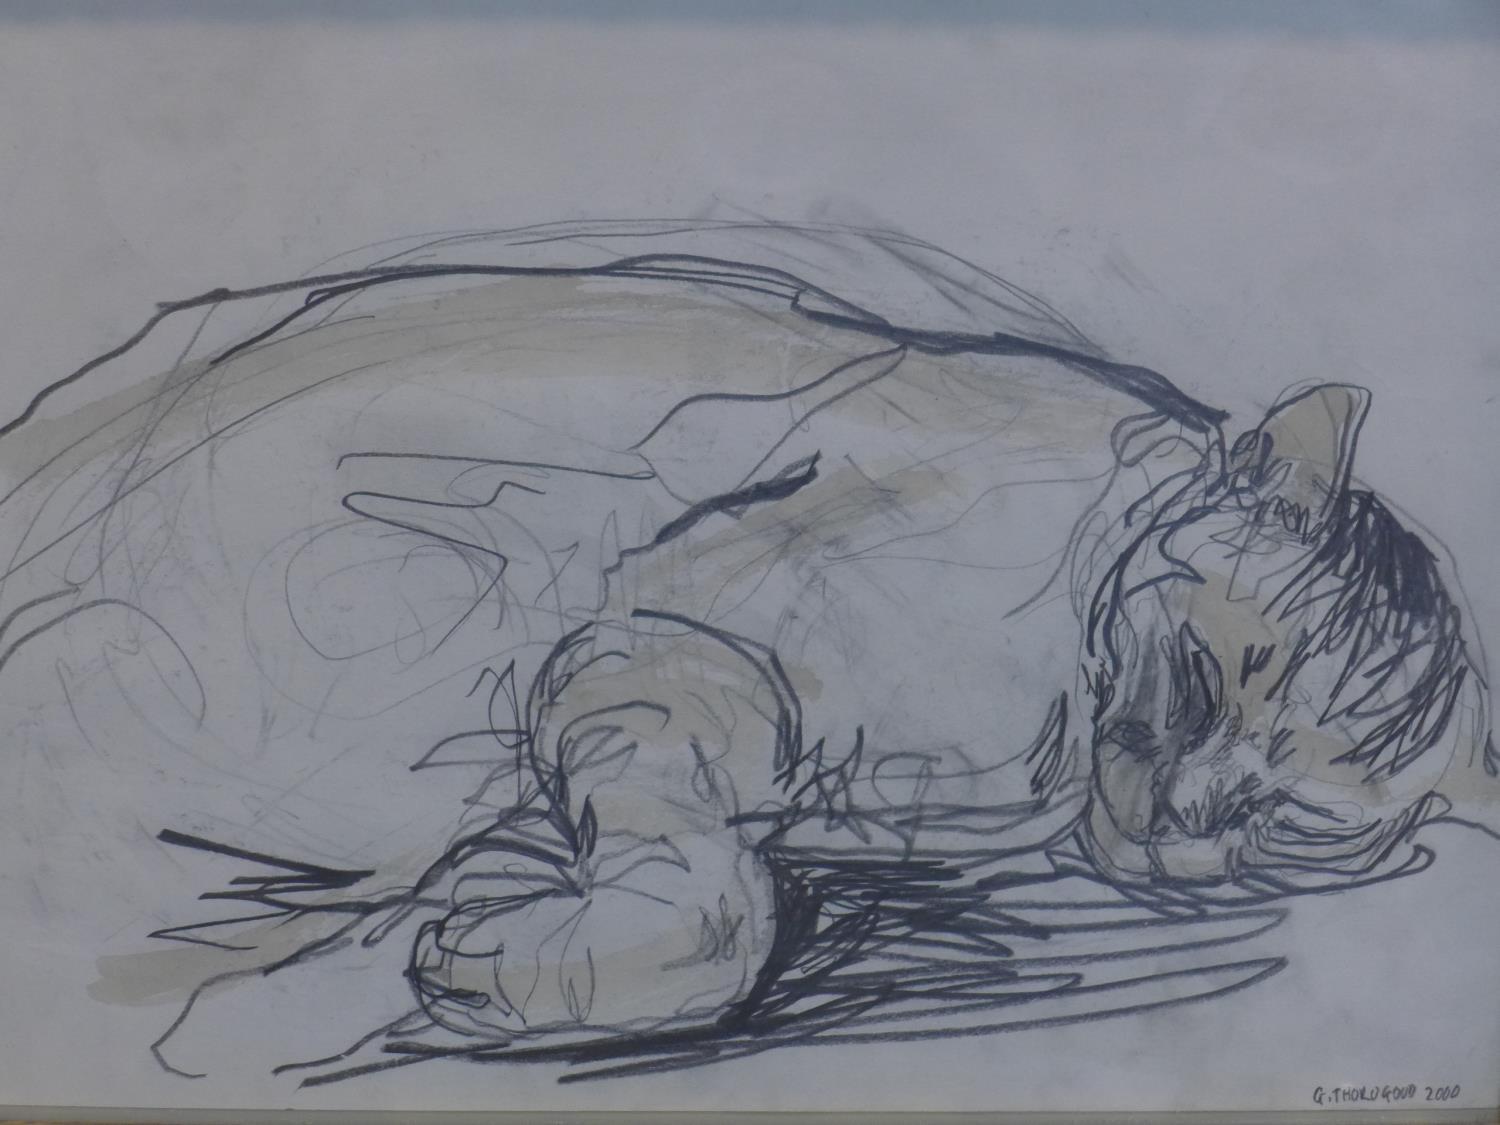 Contemporary British draughtsman, sleeping cat, pencil and watercolour, signed and dated 'G.